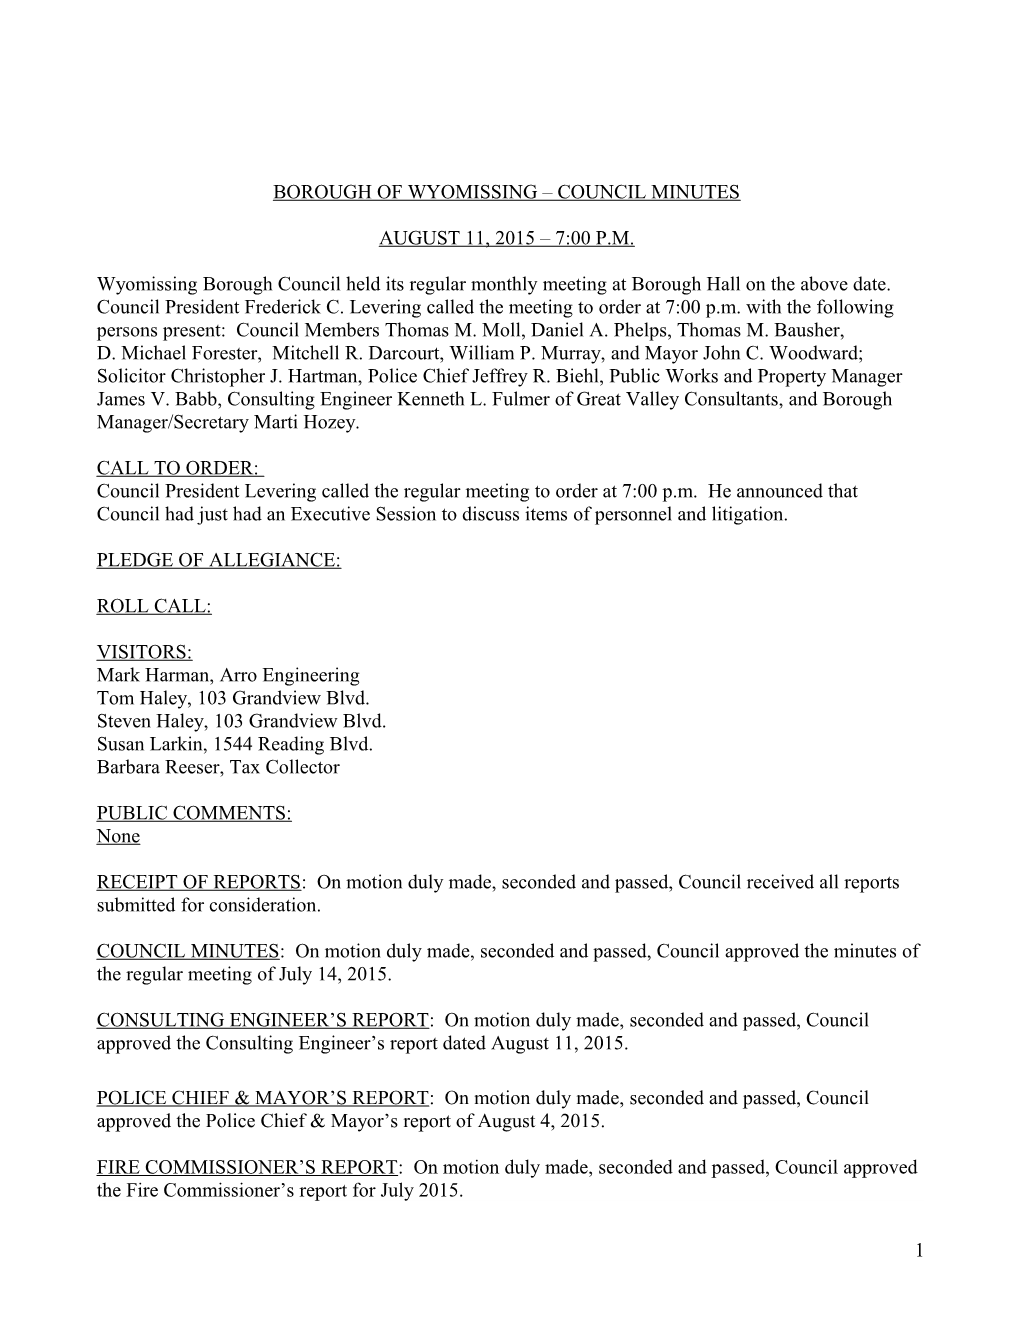 Borough of Wyomissing Council Minutes